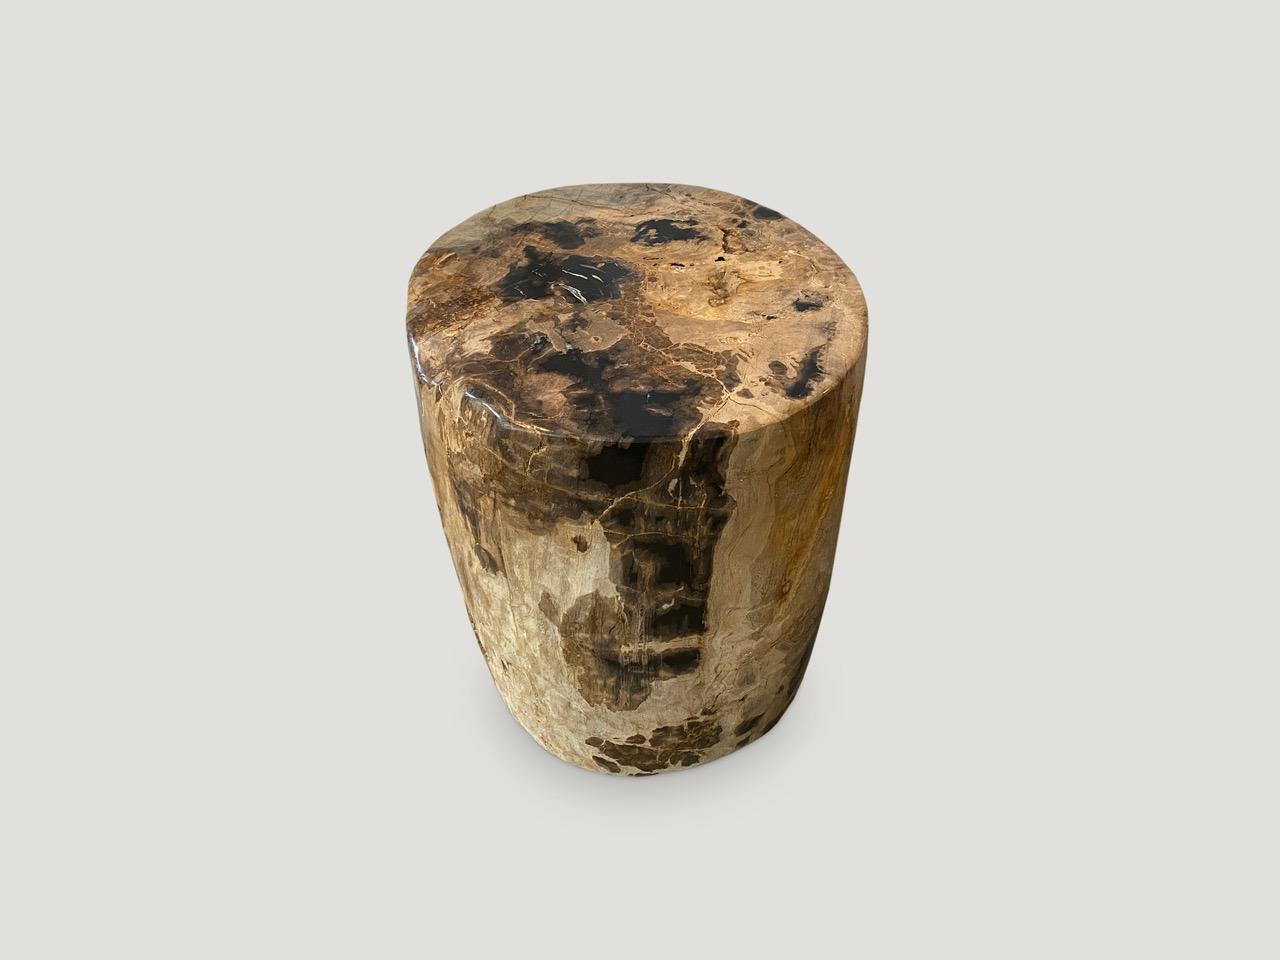 Stunning earth tones on this high quality petrified wood side table. It’s fascinating how Mother Nature produces these exquisite 40 million year old petrified teak logs with such contrasting colors and natural patterns throughout. Modern yet with so